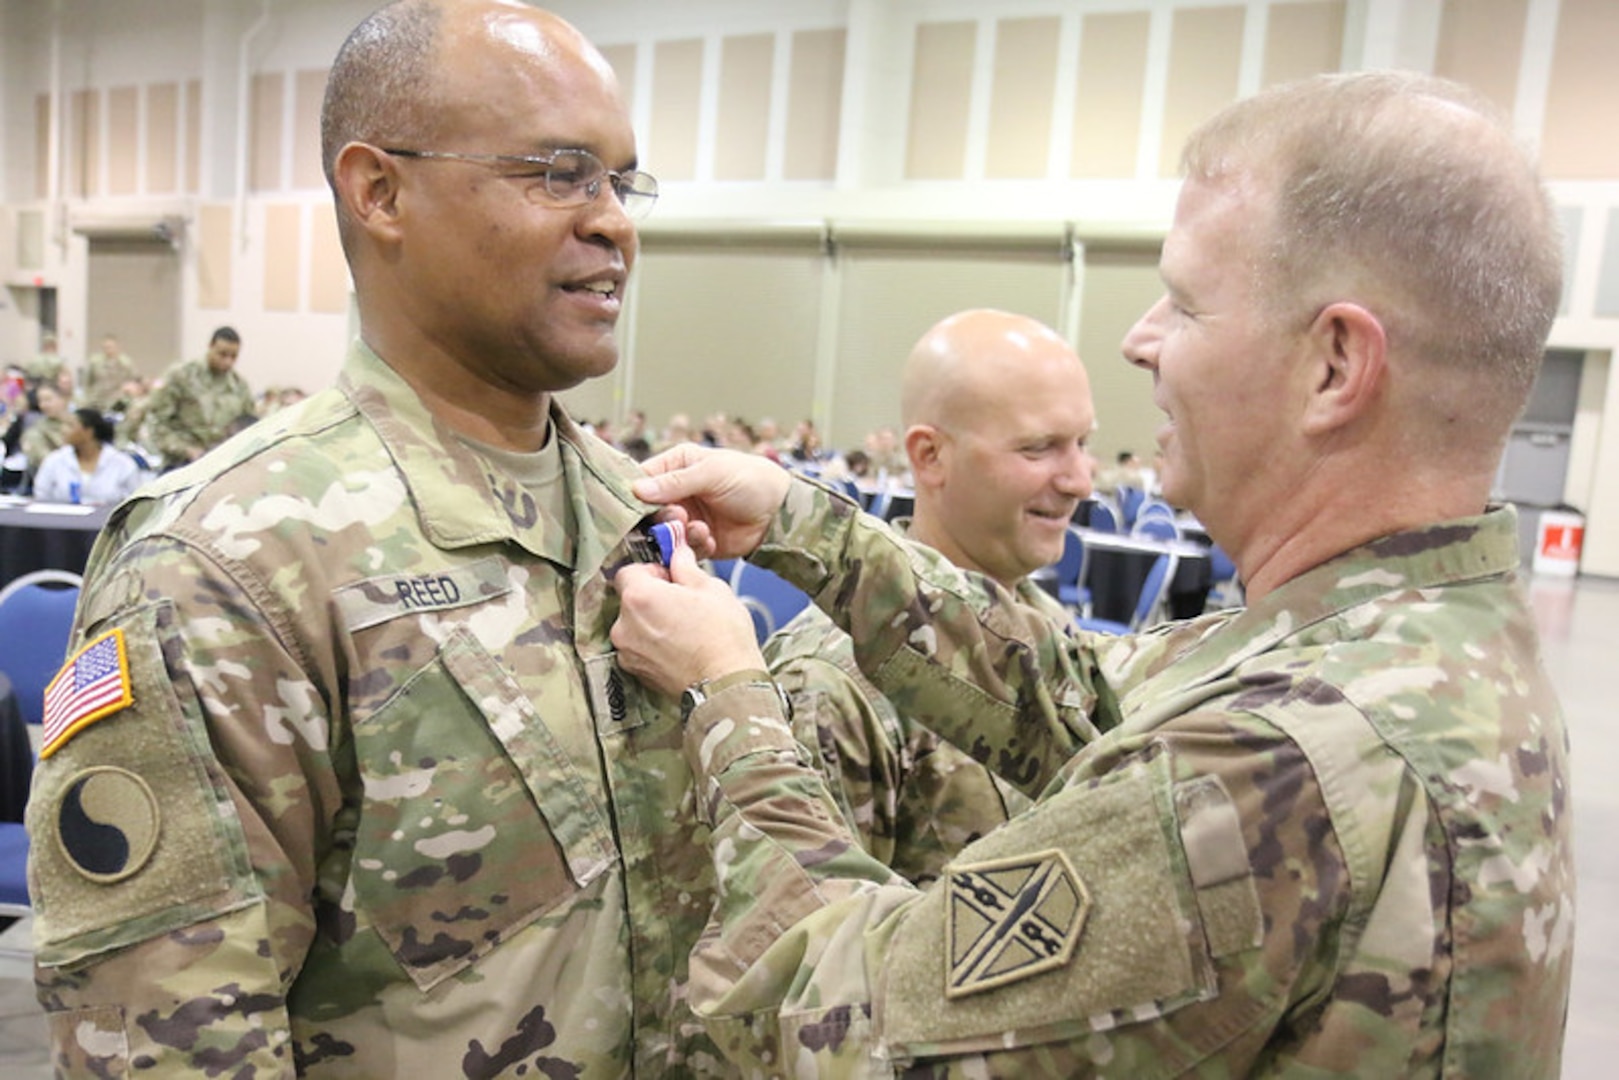 Maj. Gen. Timothy P. Williams, the Adjutant General of Virginia, presents Command Sgt. Maj. Irving Reed Jr. with the  Governor's National Service Medal May 21, 2017, in Roanoke, Virginia, in recognition of his federal active duty service conducting security operations in Qatar from May 2016 to April 2017. The battalion and several companies also were recognized with national- and state-level training readiness awards. (U.S. National Guard photo by Cotton Puryear)